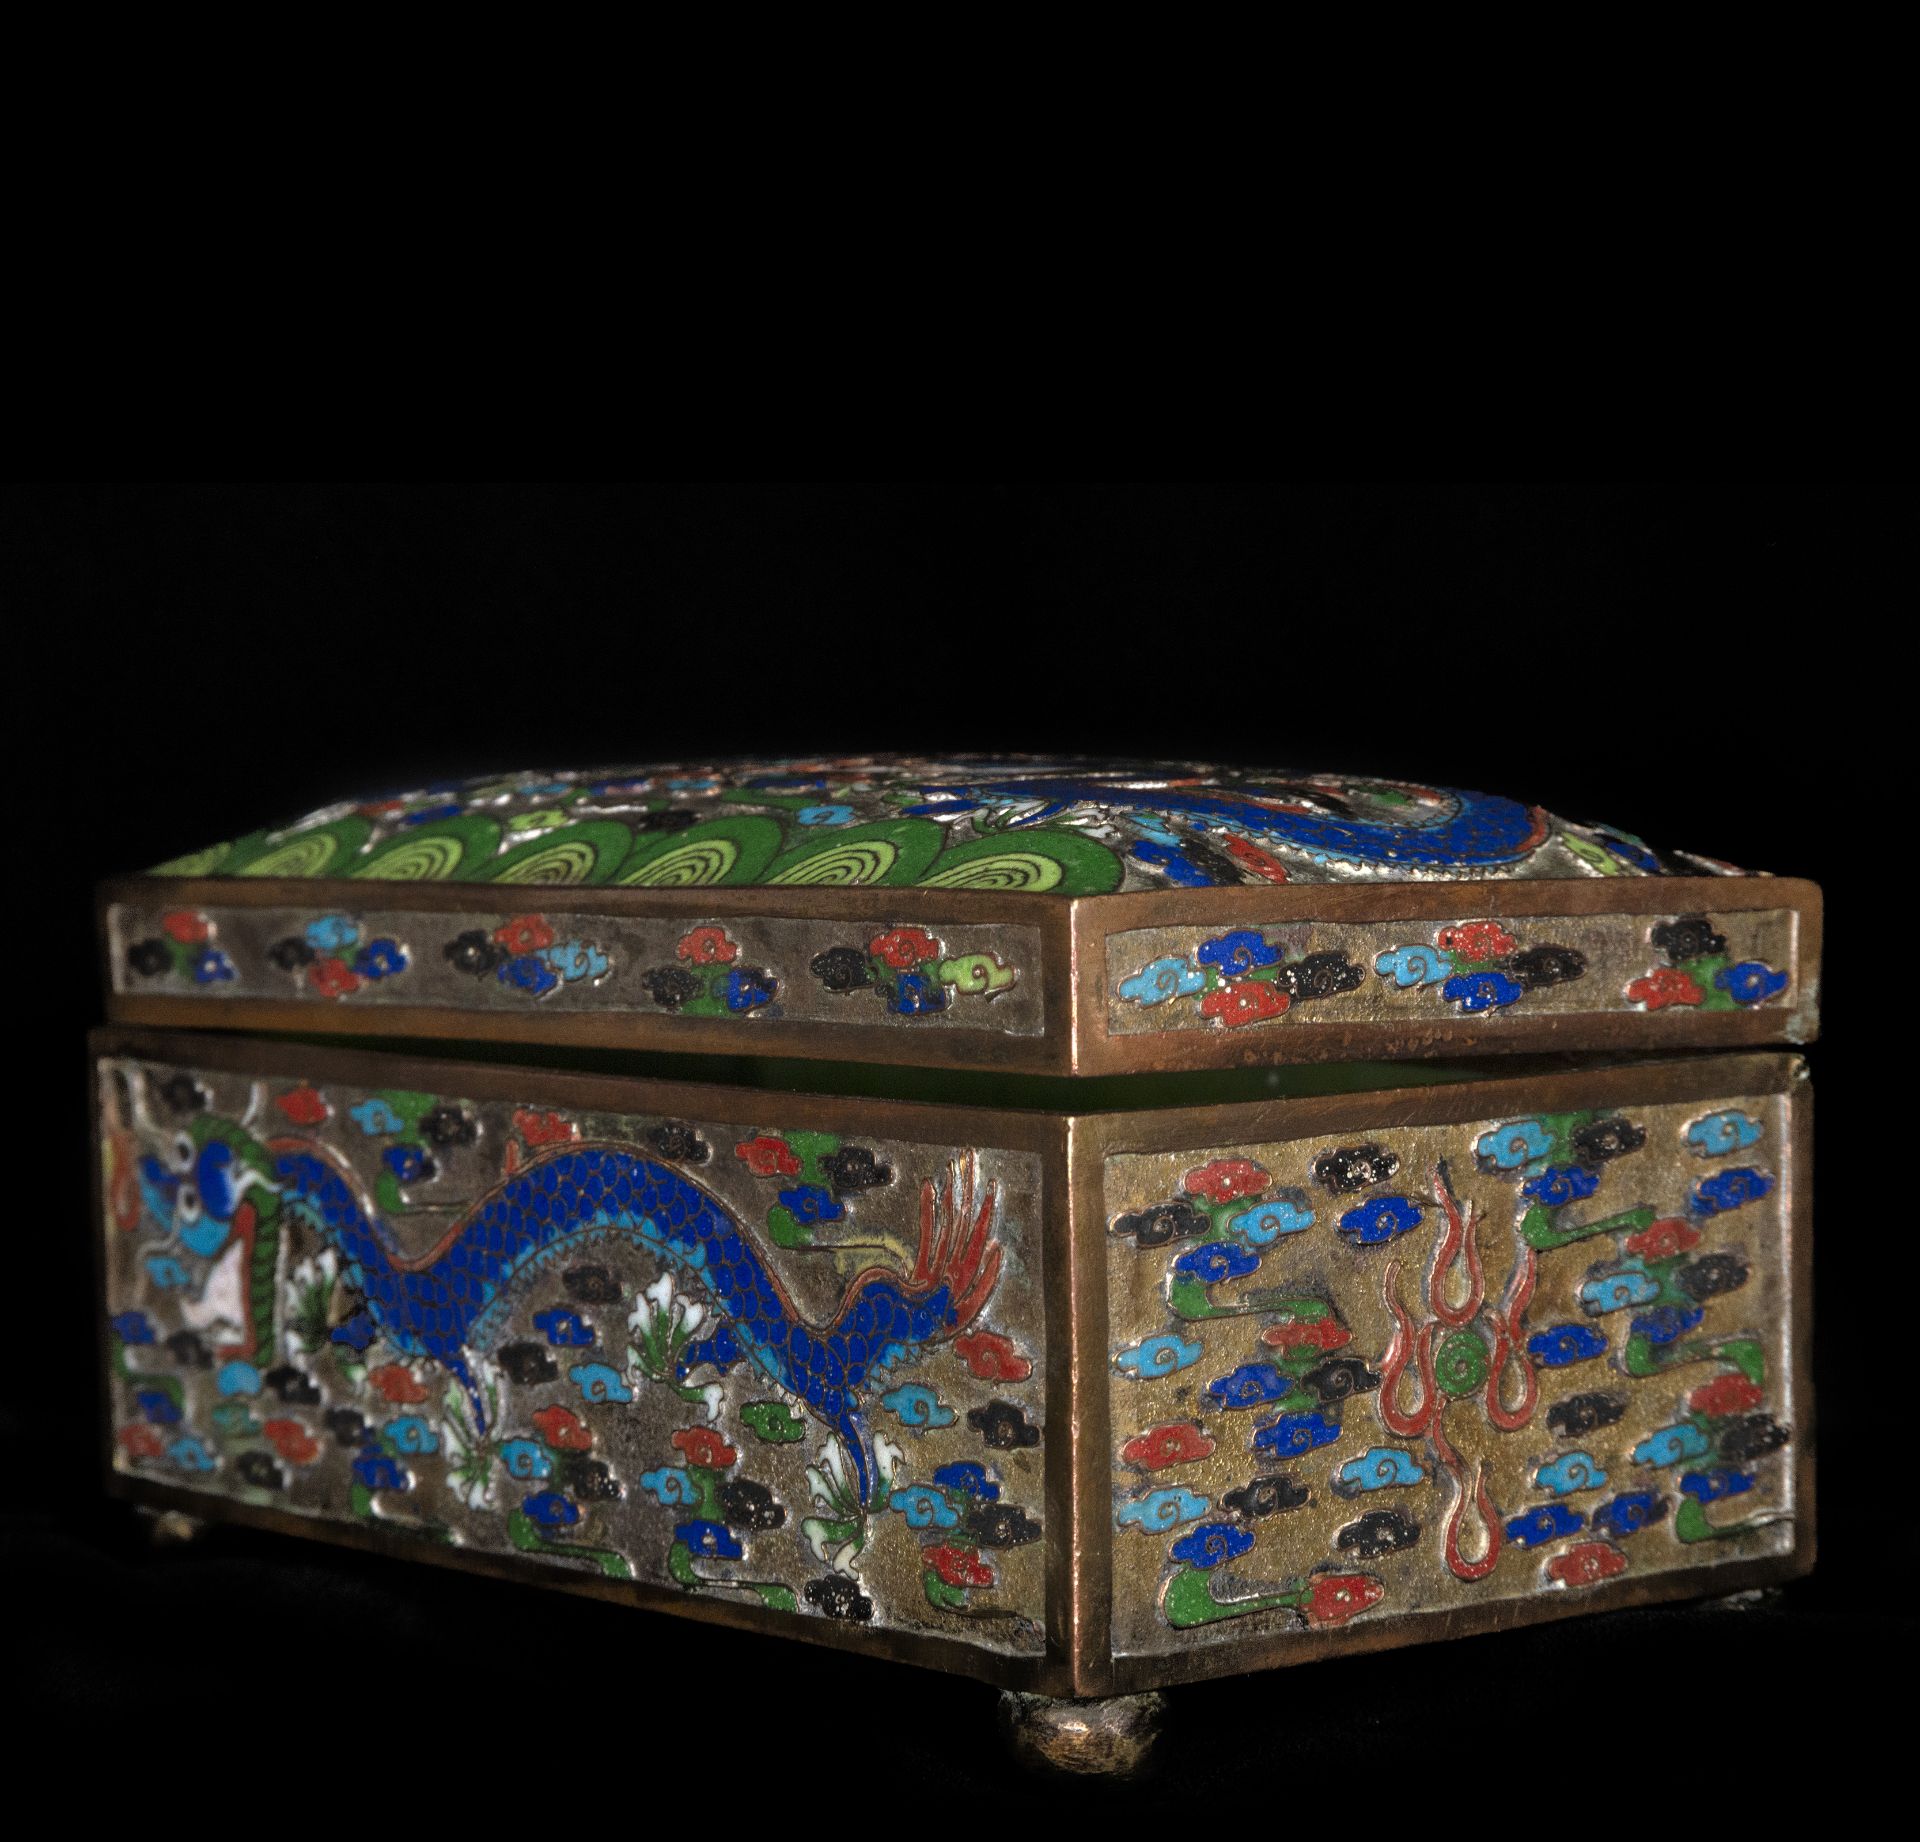 Chinese Cloisonne box from the 19th century - Image 3 of 5